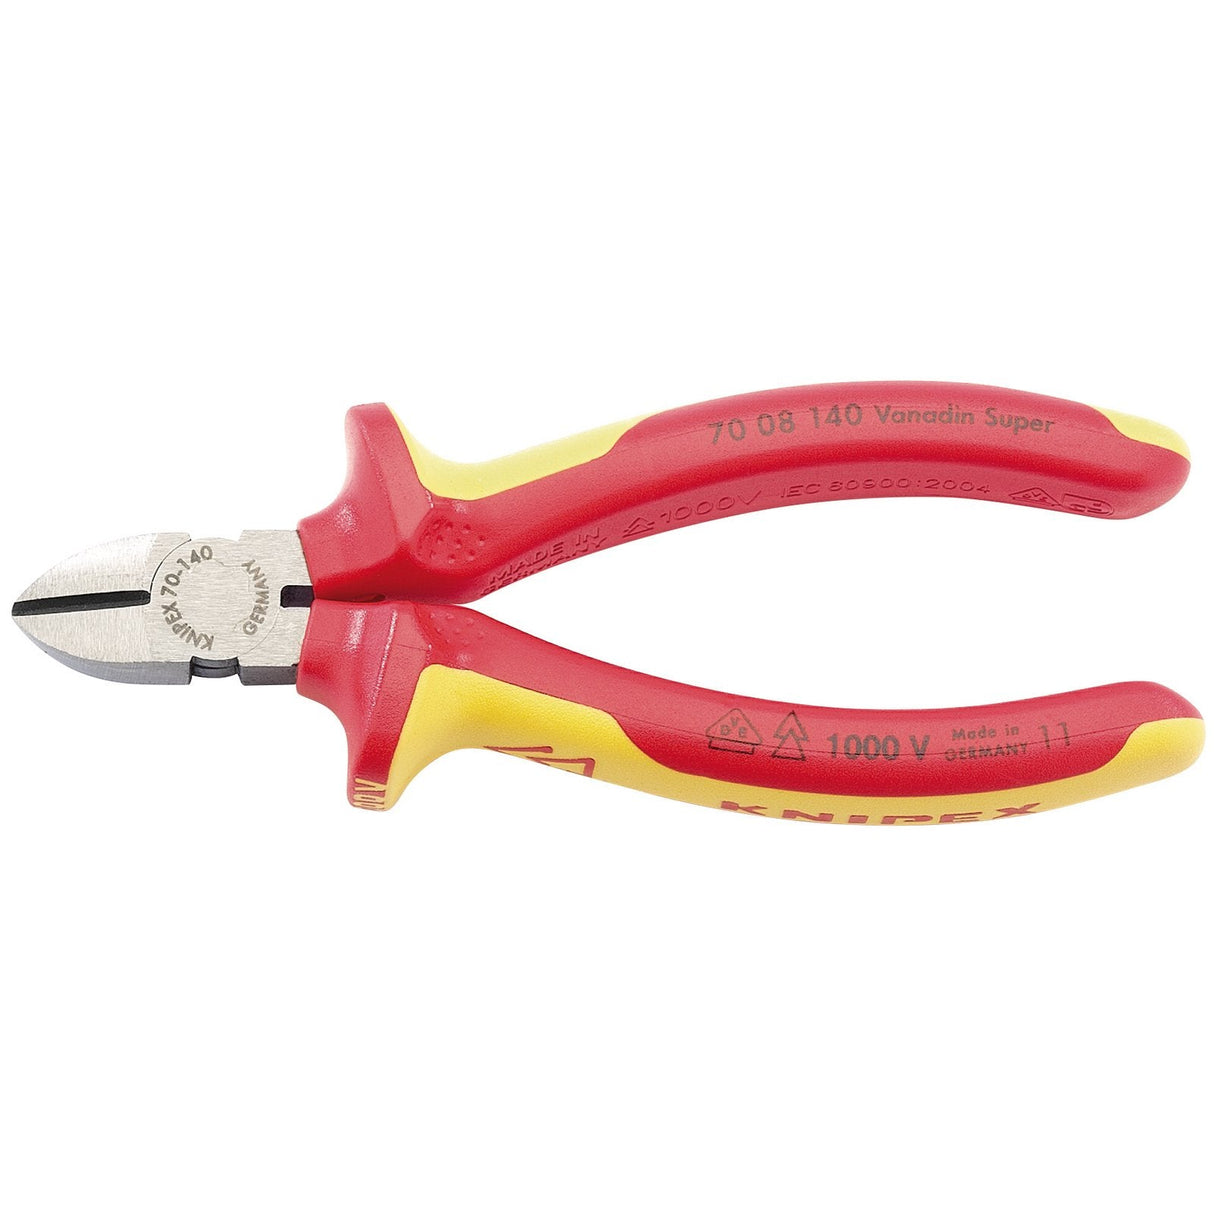 Draper Knipex 70 08 140Uksbe Vde Fully Insulated Diagonal Side Cutters, 140mm - 70 08 140 UKSBE - Farming Parts